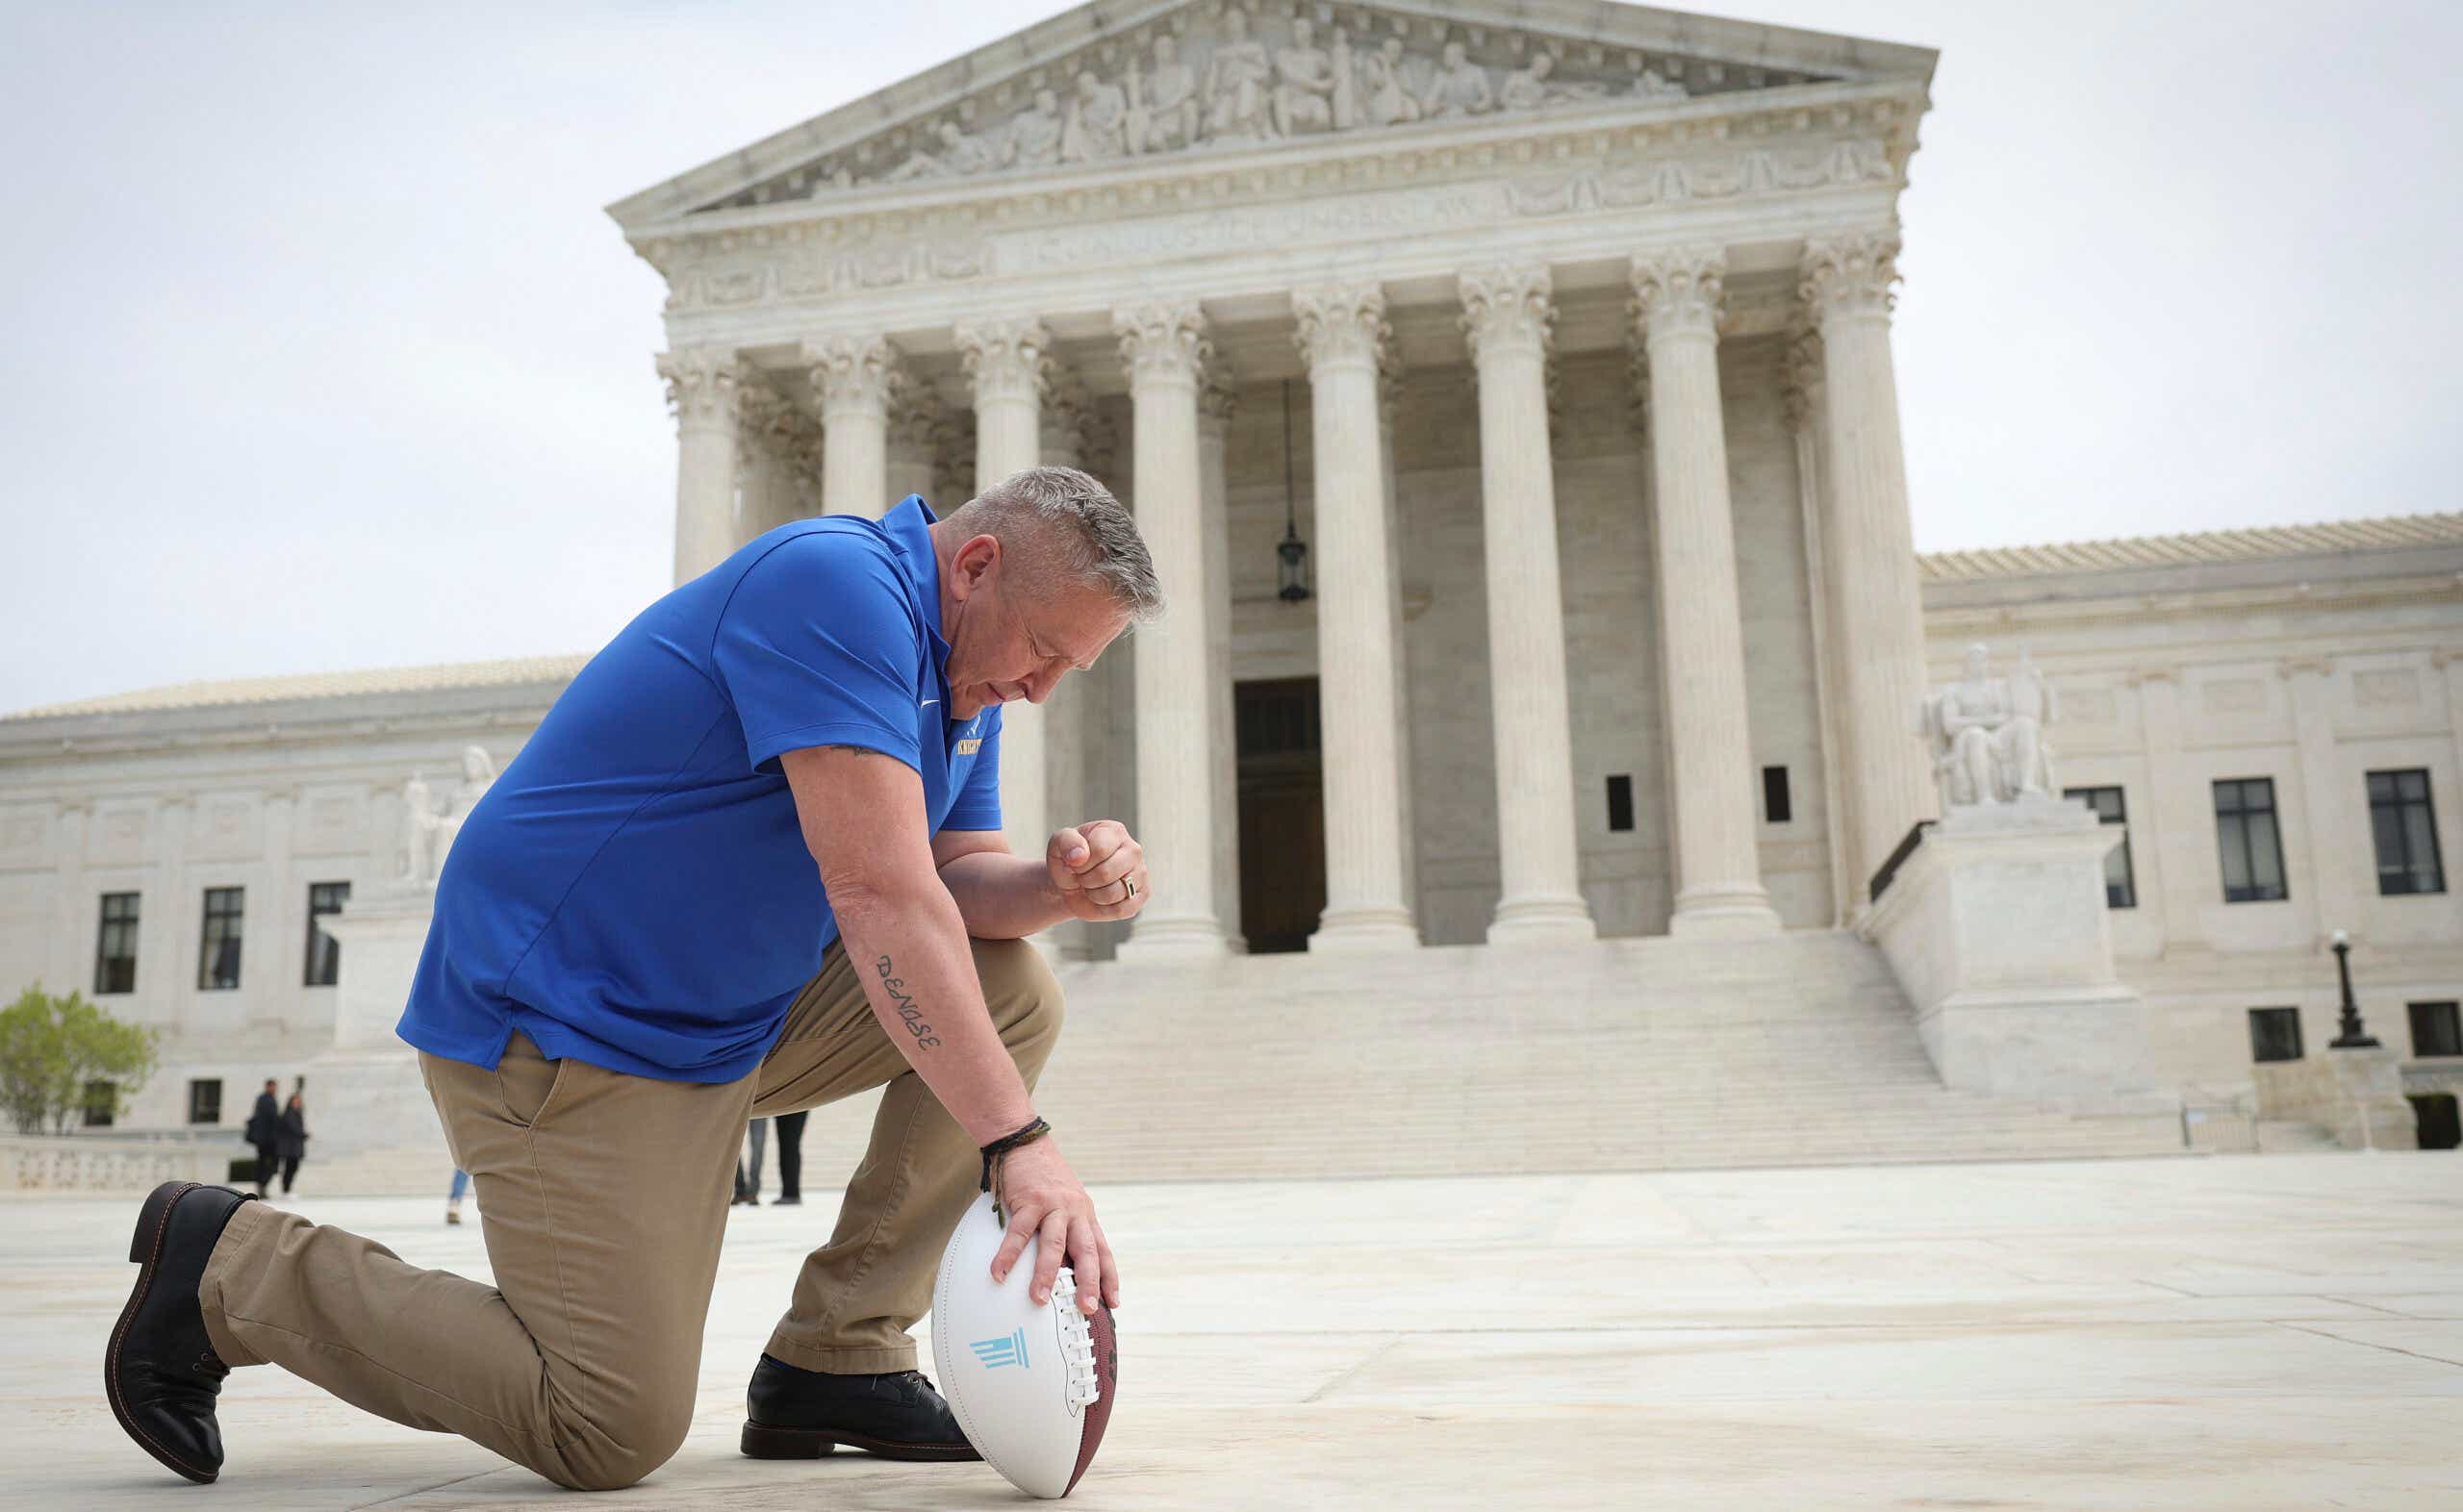 Ex football coach kneels in front of Supreme Court